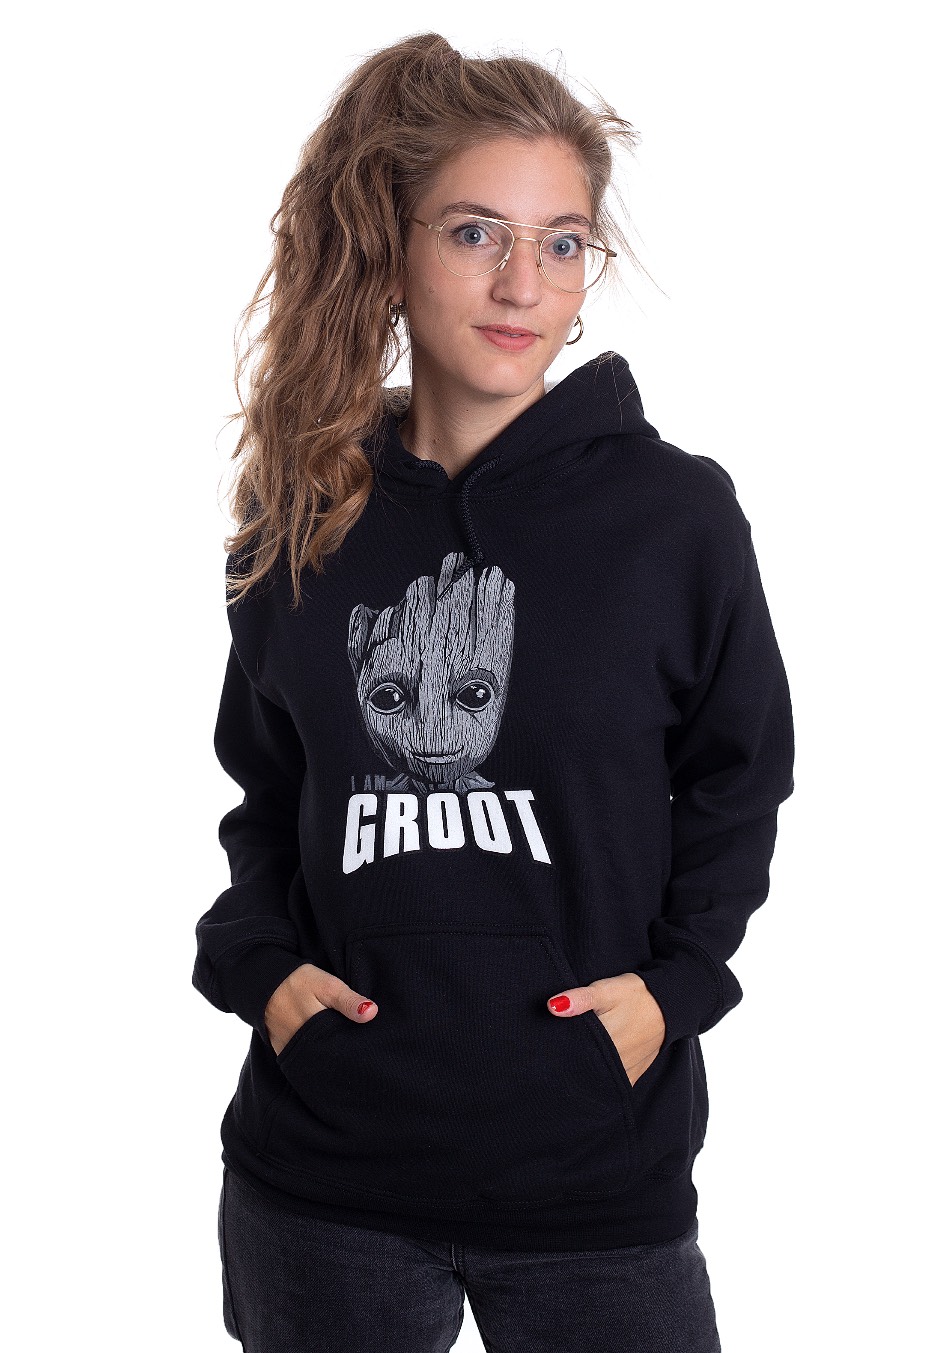 Guardians Of The Galaxy - Groot Face - Hoodies